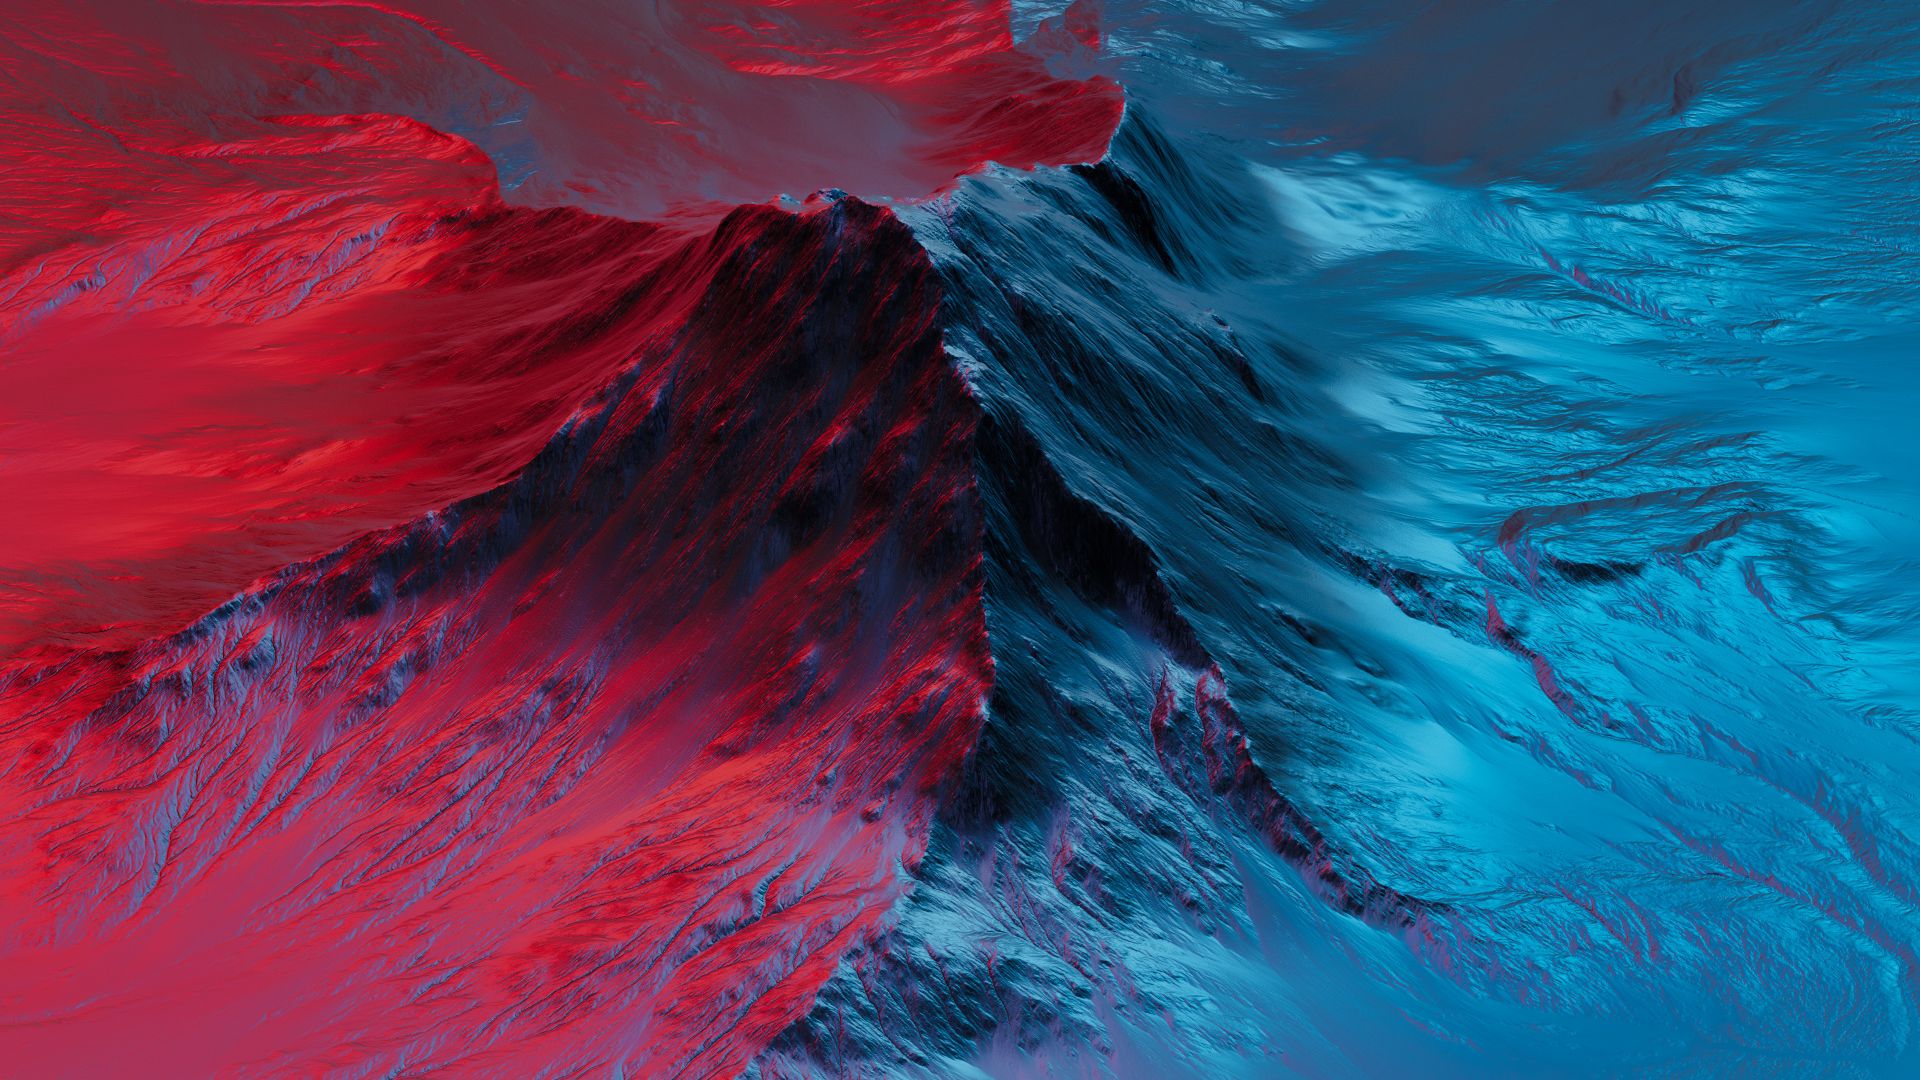 Desktop Wallpaper Mountain, Neon, Red Blue, Redmibook, HD Image, Picture, Background, Fe9550